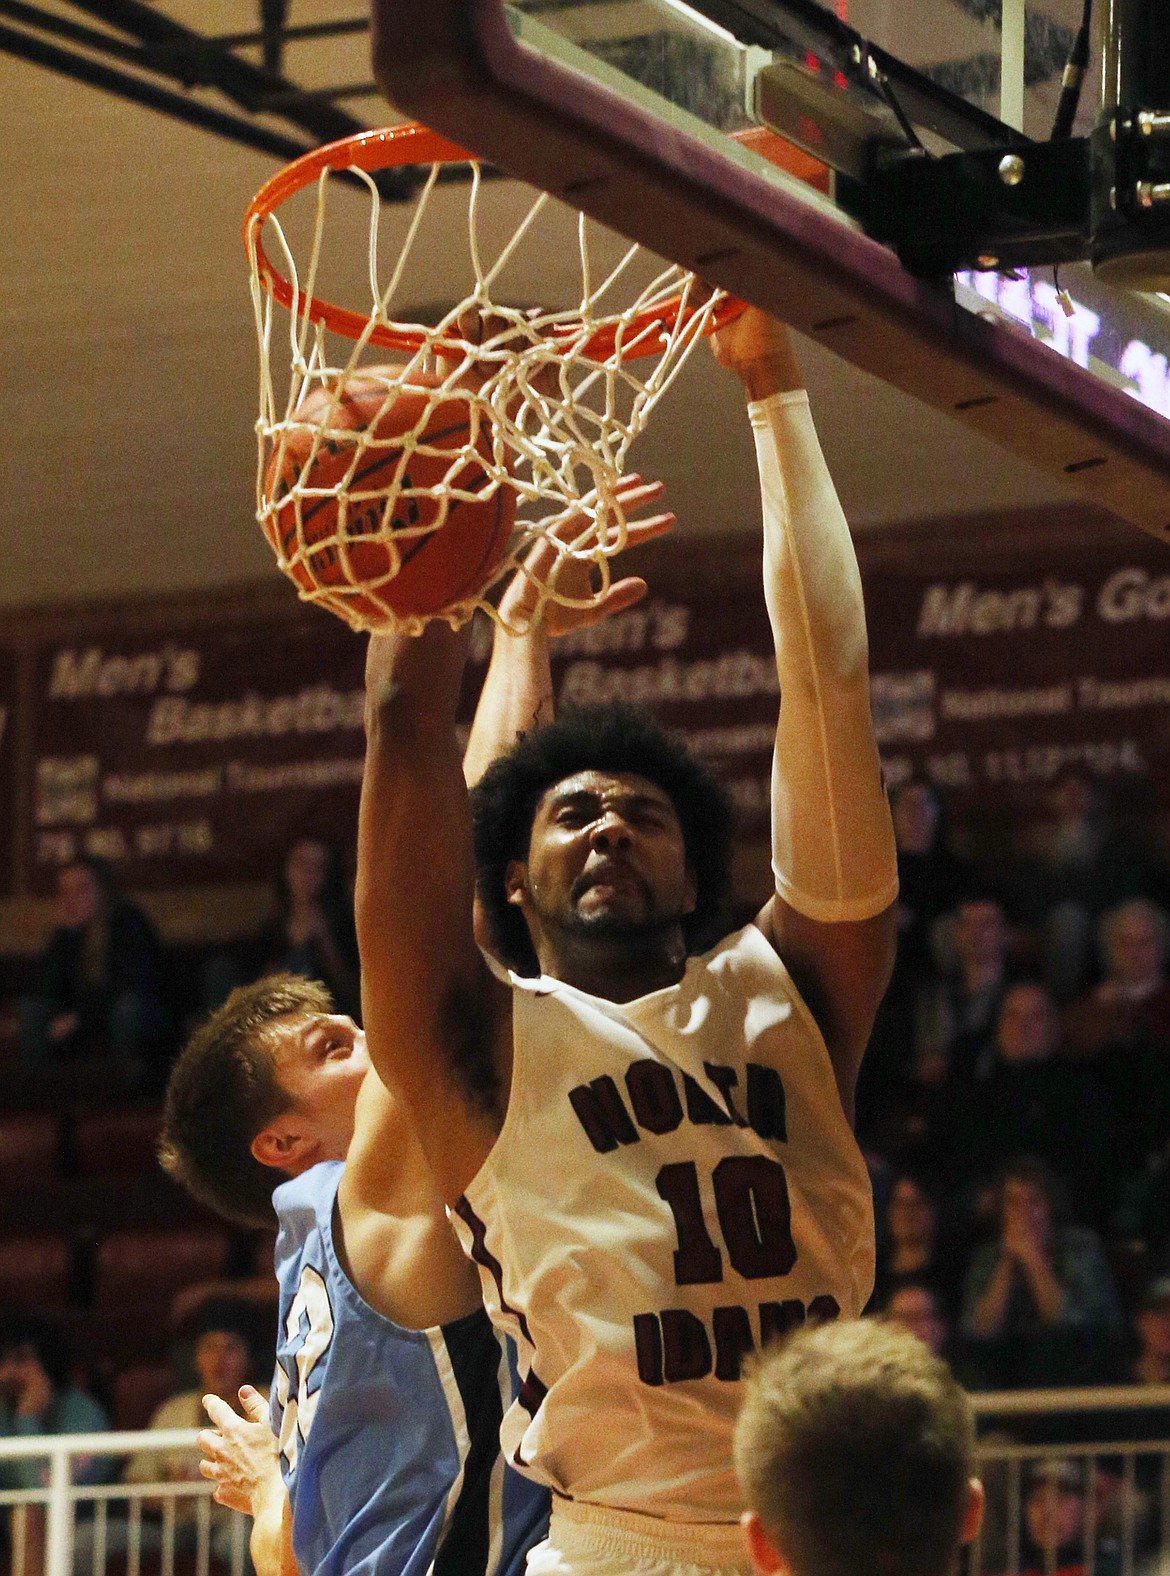 North Idaho College's Alphonso Anderson dunks the ball during a game against Community Colleges of Spokane Wednesday night at NIC. (LOREN BENOIT/Press)